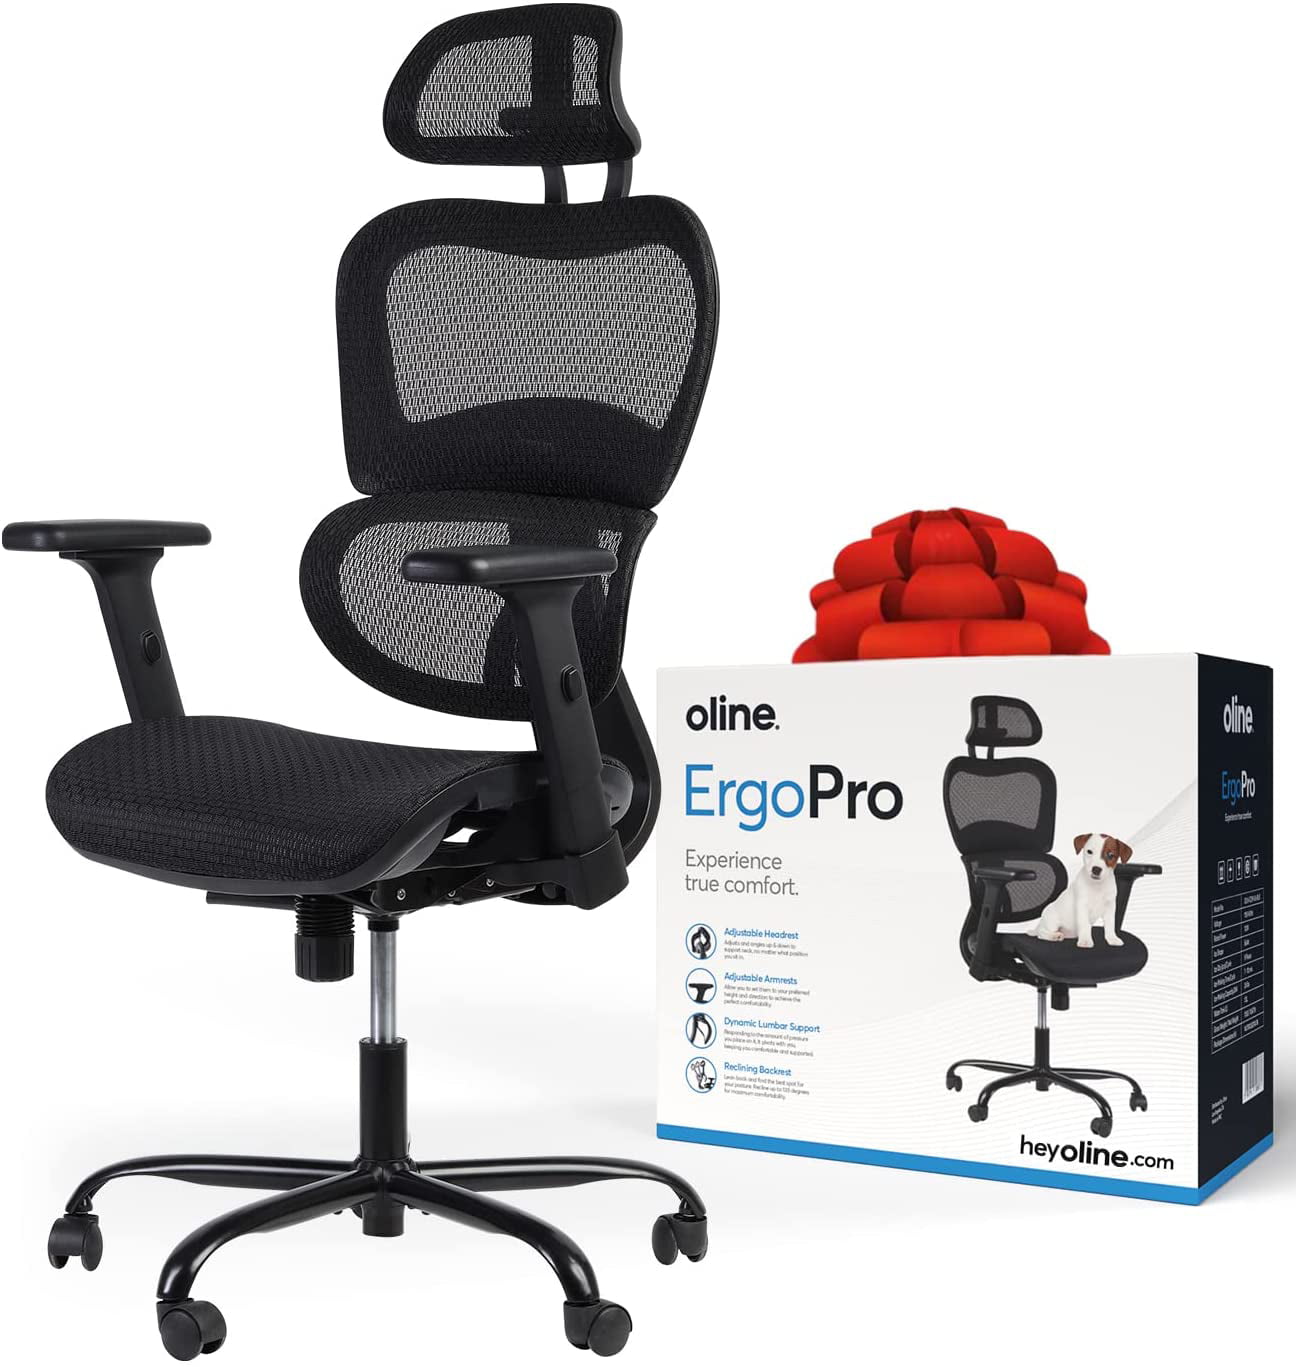 3D Lumbar Support and Extra Blade Wheels NOUHAUS Ergo3D Ergonomic Office Chair Gaming Chairs Executive Swivel Chair Mesh Computer Chair Rolling Desk Chair with 4D Adjustable Armrest Black